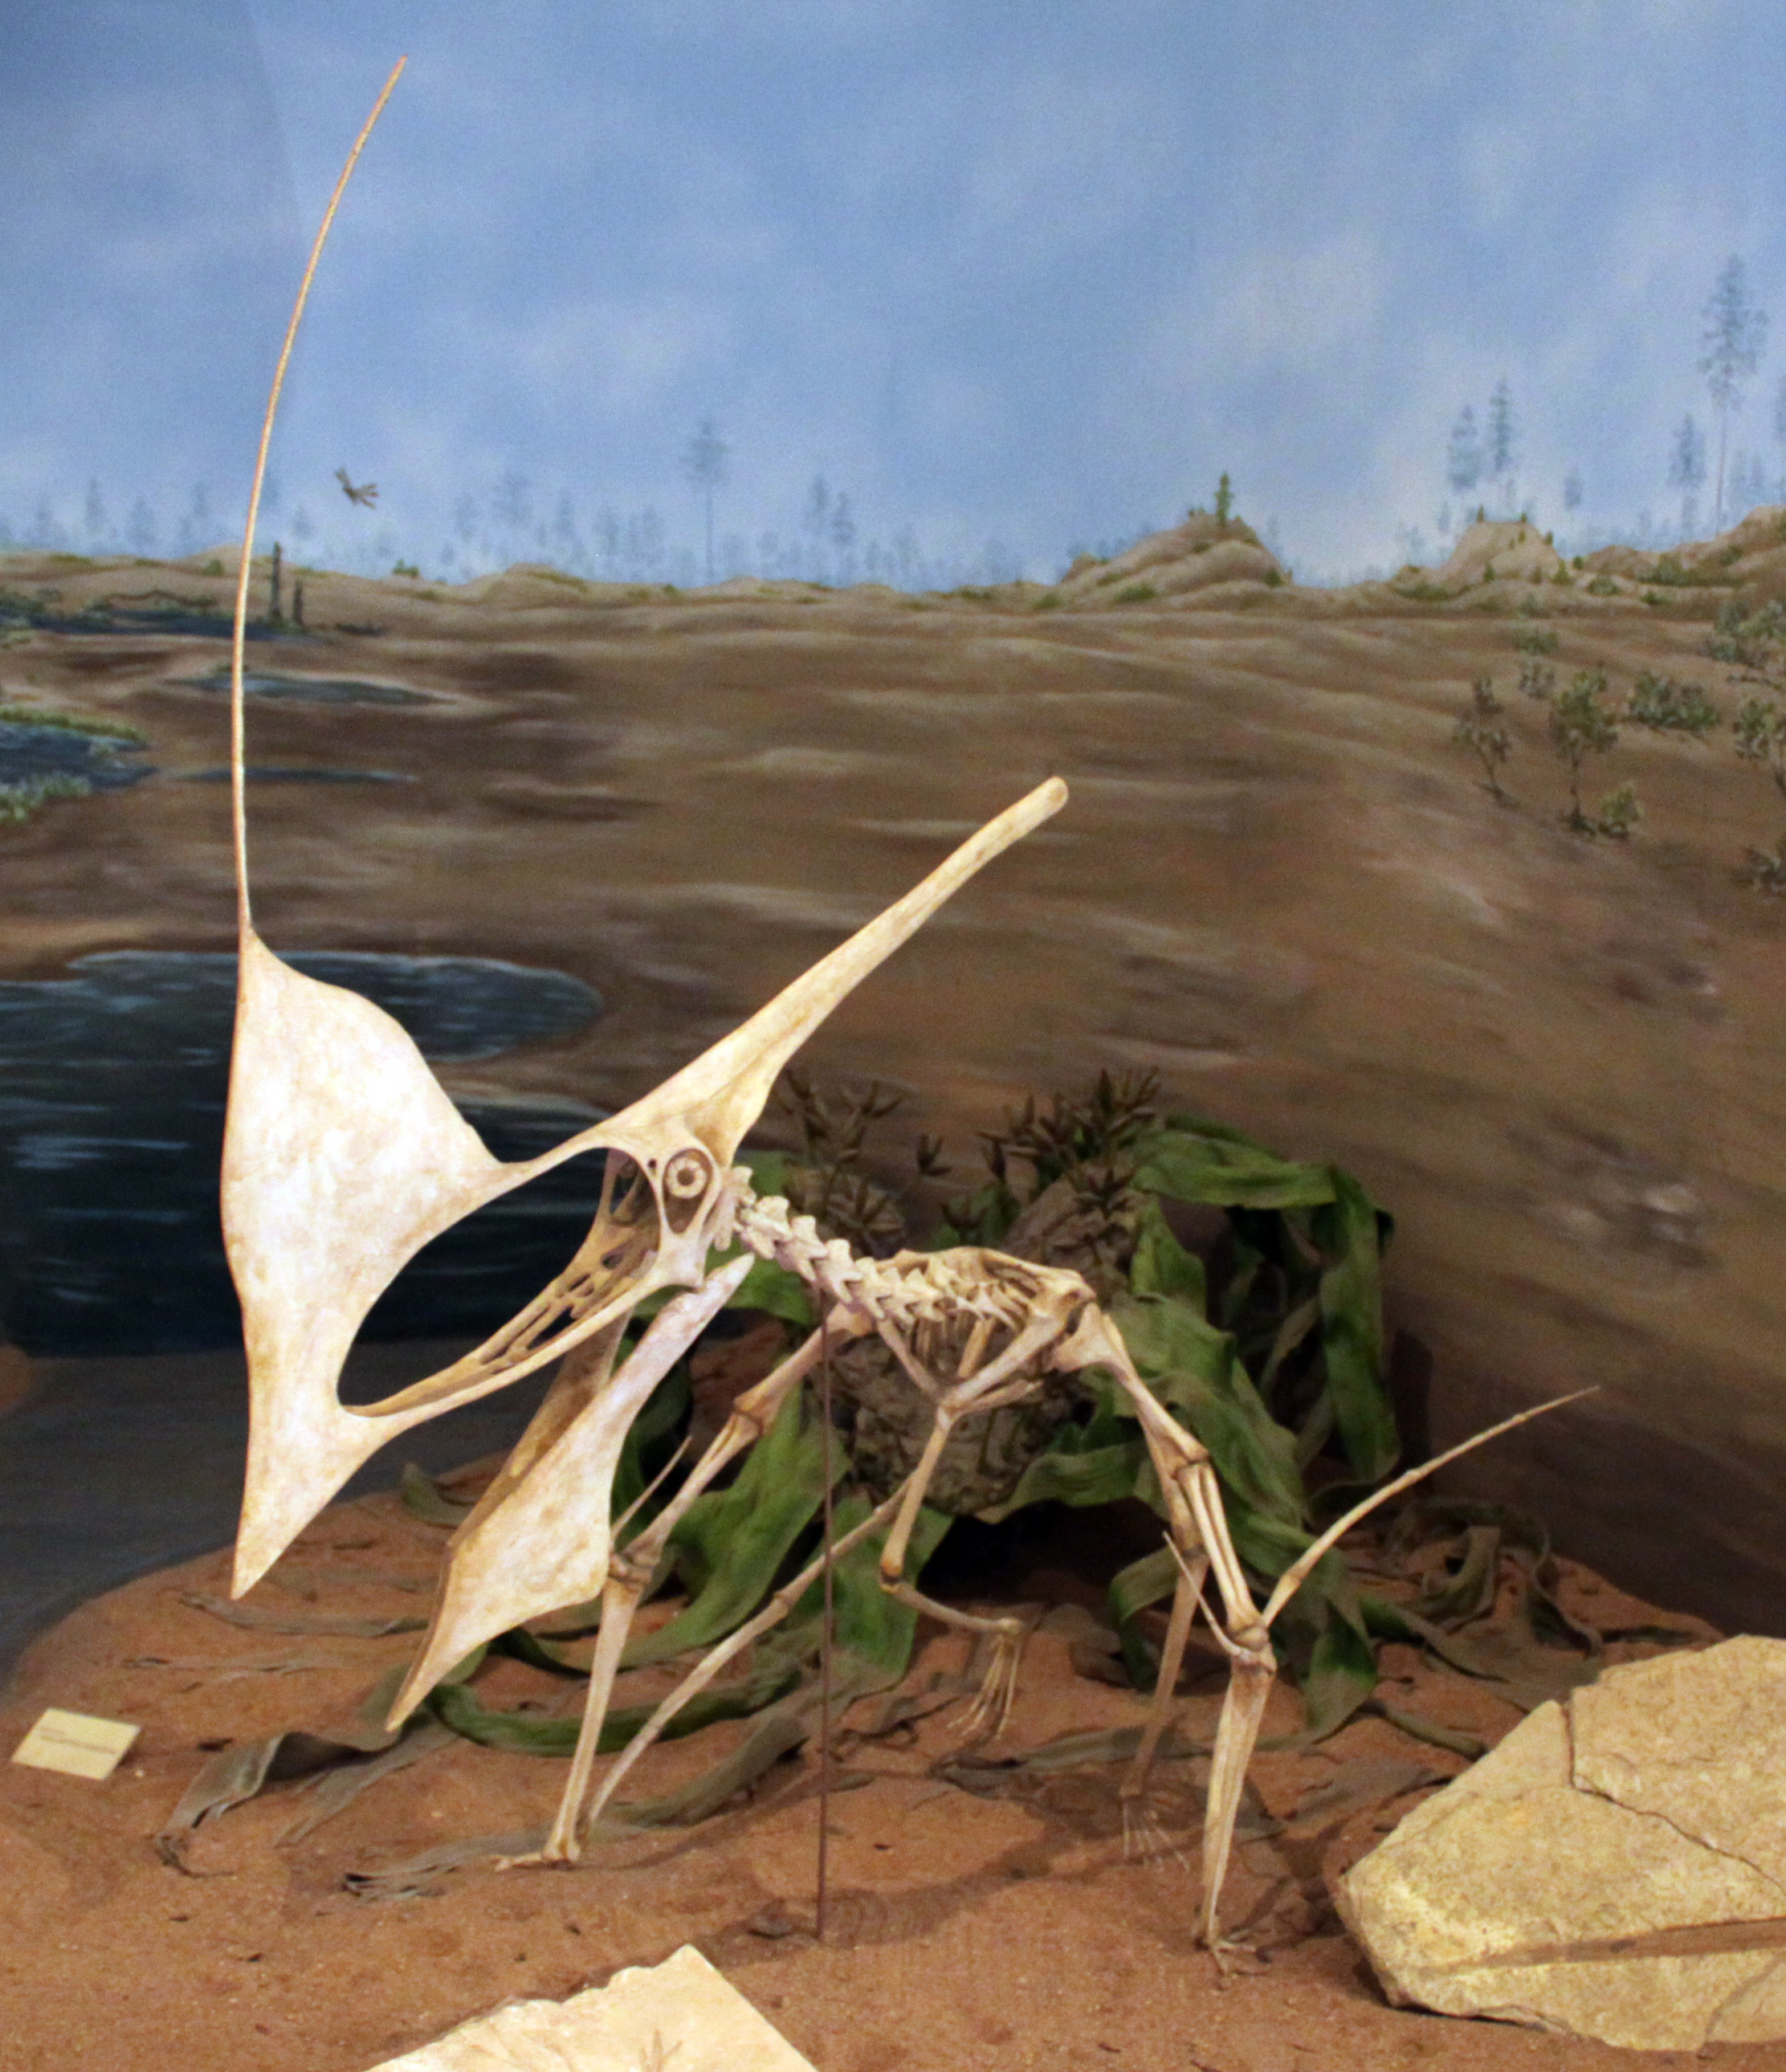 Crested pterodactyl inspires aircraft design